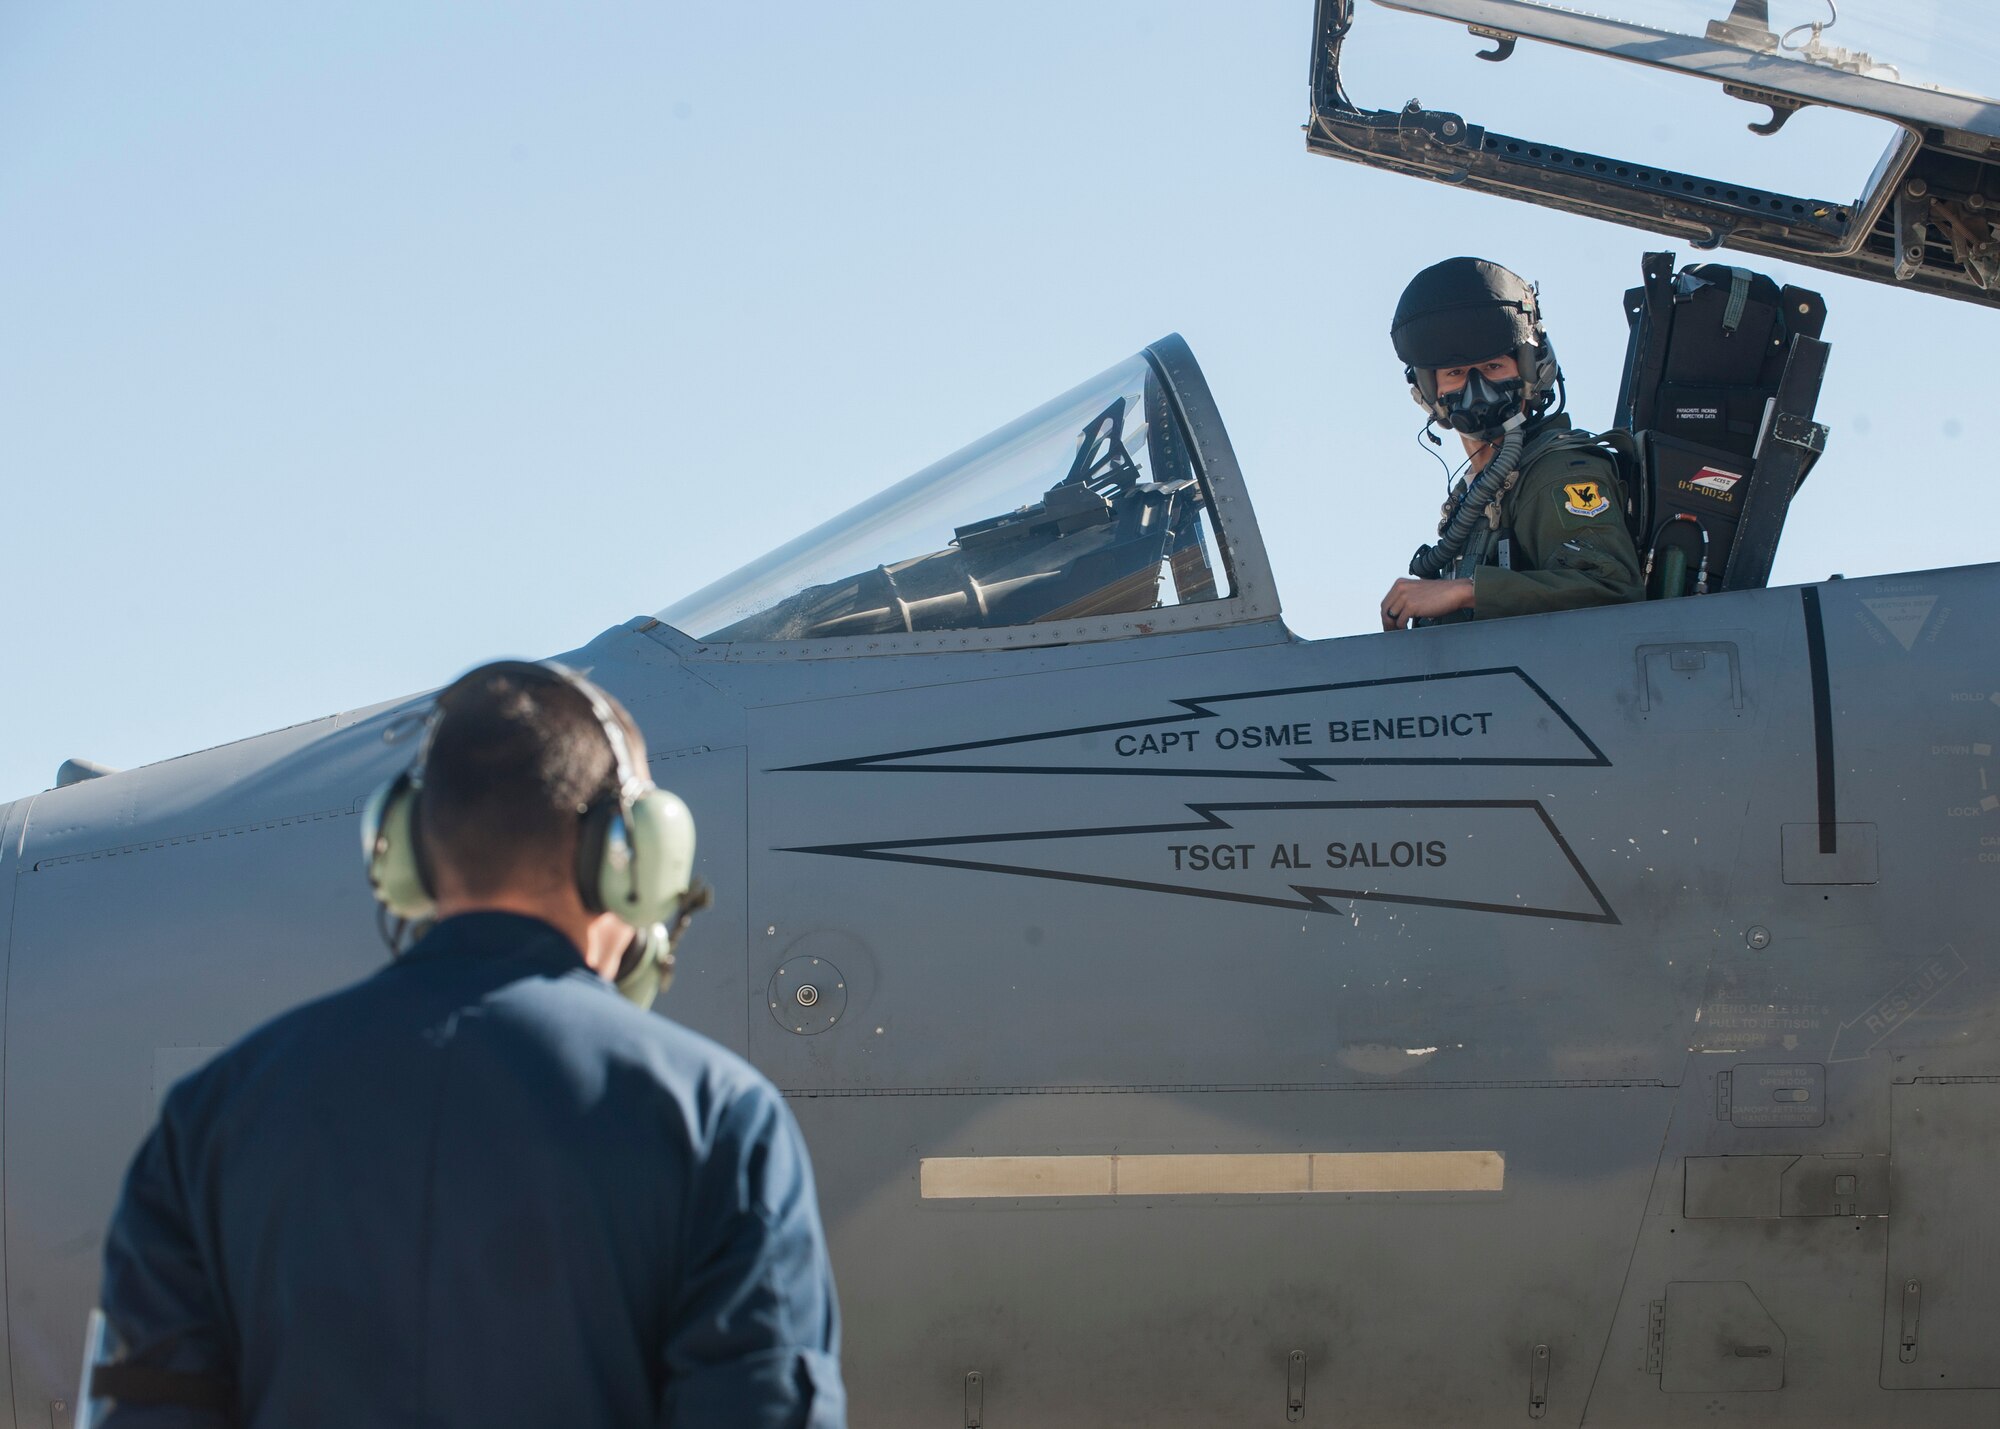 A pilot from the 104th Fighter Wing, 131st Fighter Squadron, Barnes Air National Guard Base, Mass., waits for instruction from his crew chief in preparation for take-off during Red Flag 16-1 Jan. 26, 2016, at Nellis AFB. Flying units from around the globe deploy to Nellis AFB to participate in Red Flag, where it is held four times a year and organized by the 414th Combat Training Squadron. (U.S. Air Force photo by Senior Airman Jake Carter)